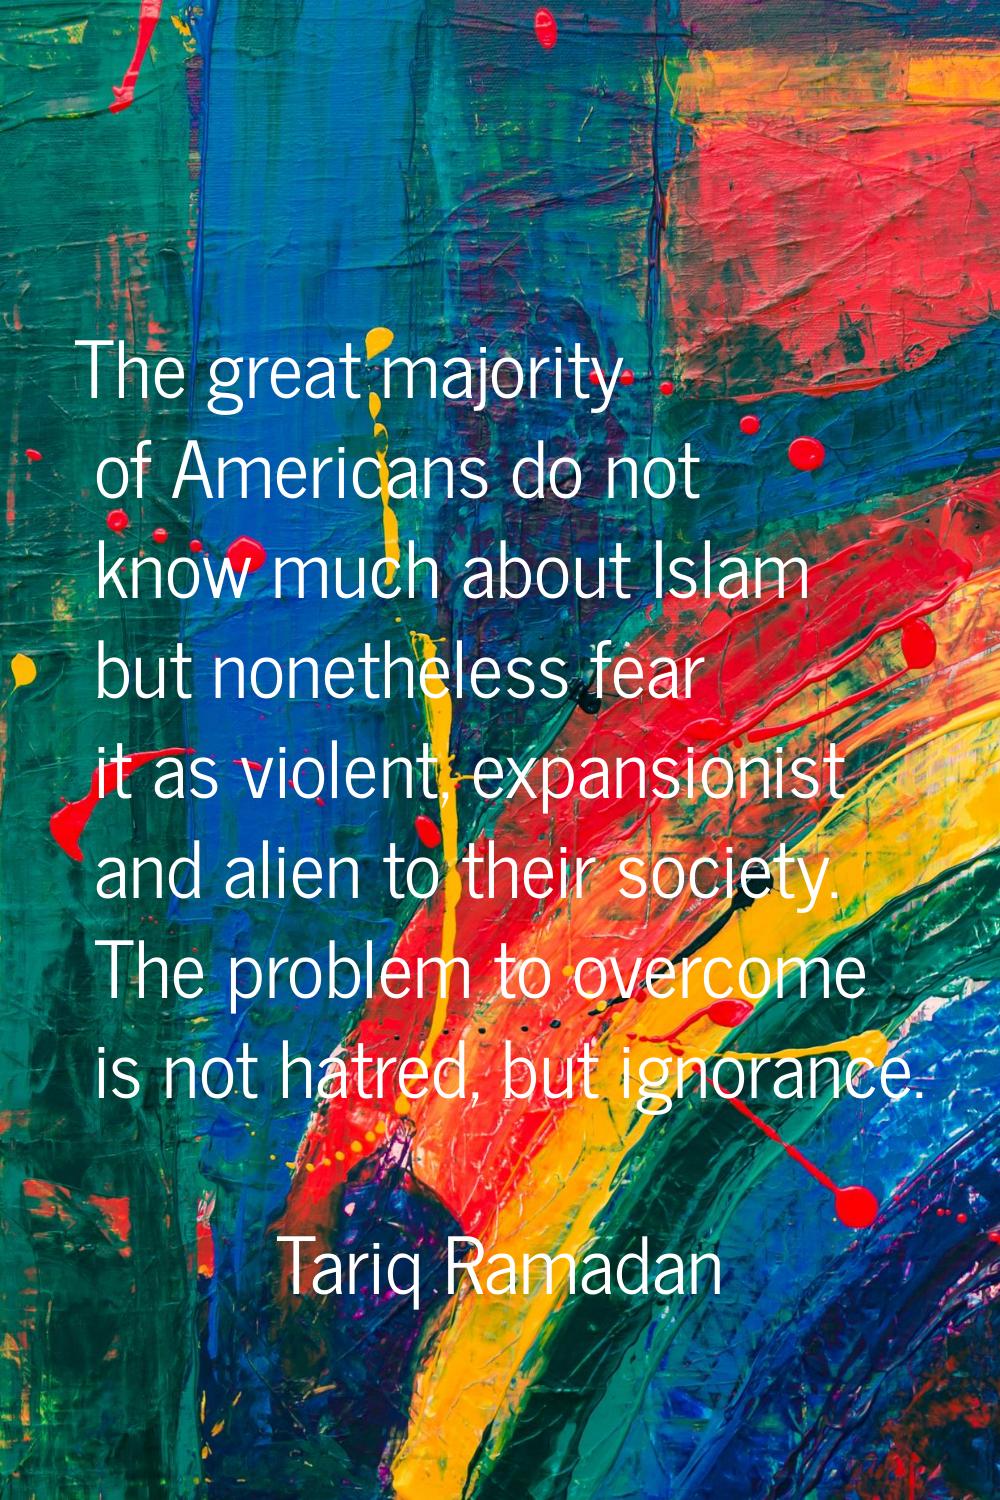 The great majority of Americans do not know much about Islam but nonetheless fear it as violent, ex